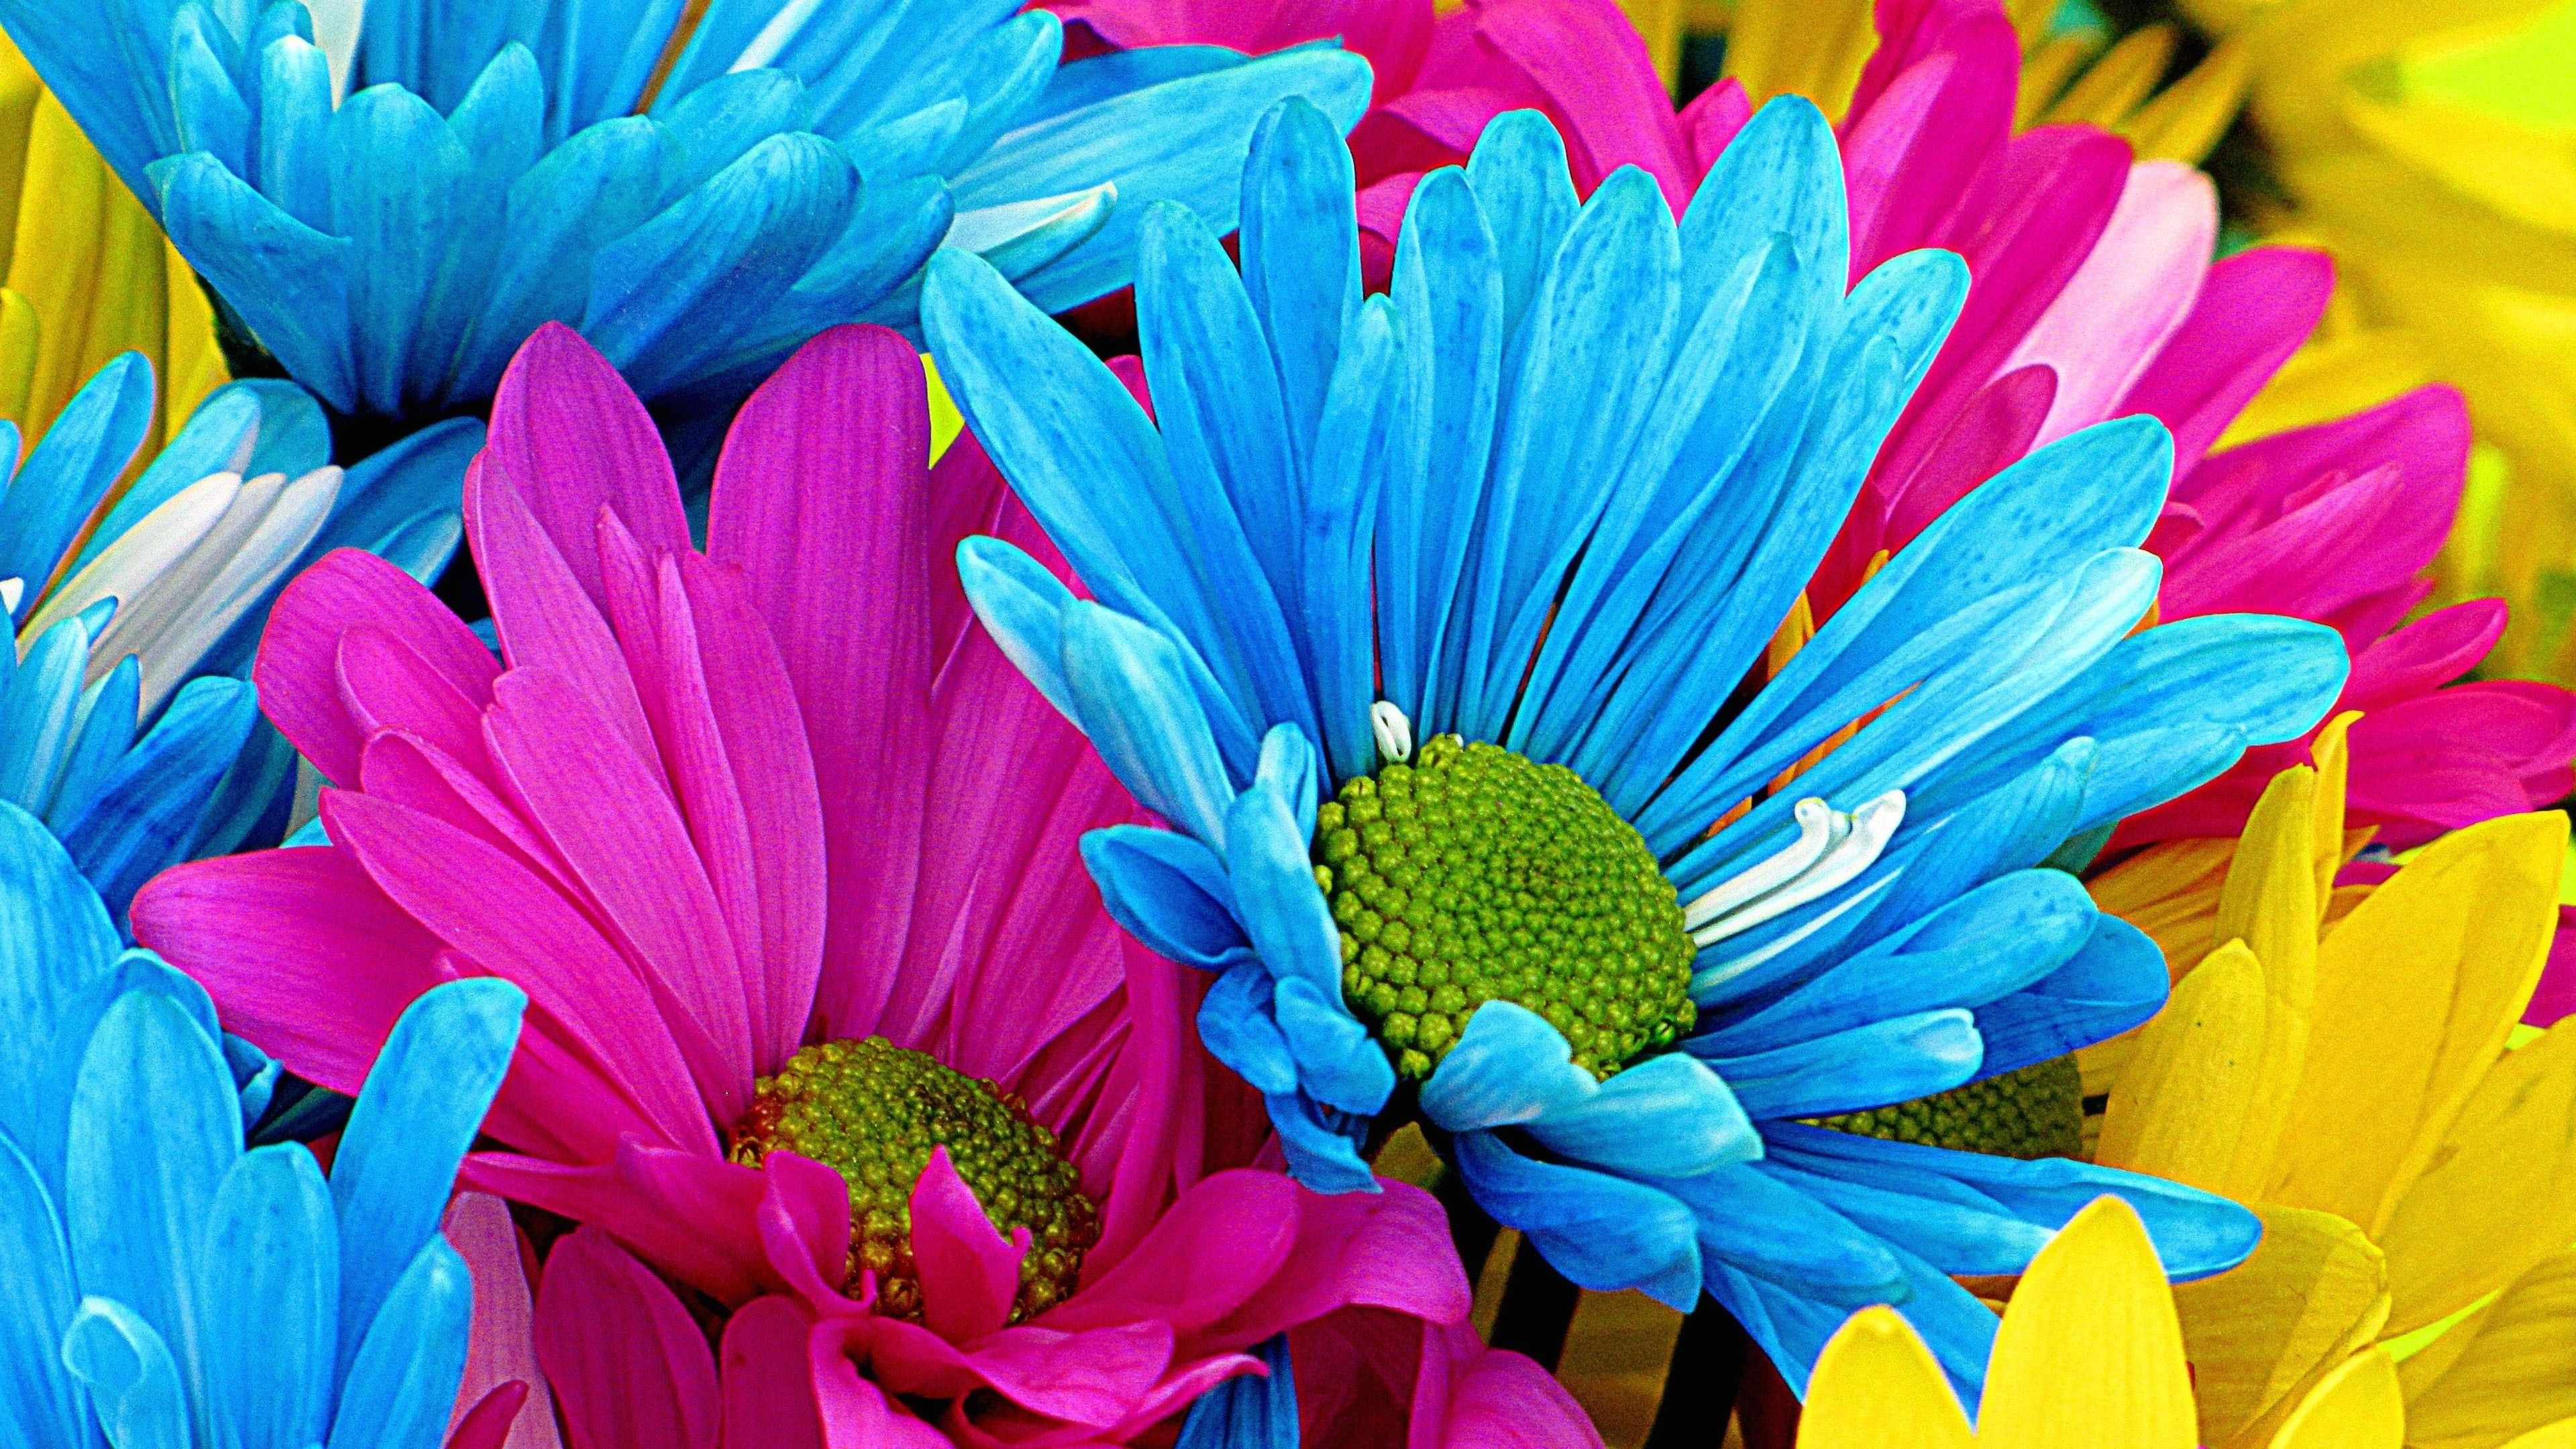 Gerbera Daisy: Tufted, caulescent, perennial herbs, often with woolly crowns, up to 80 cm high. 3840x2160 4K Background.